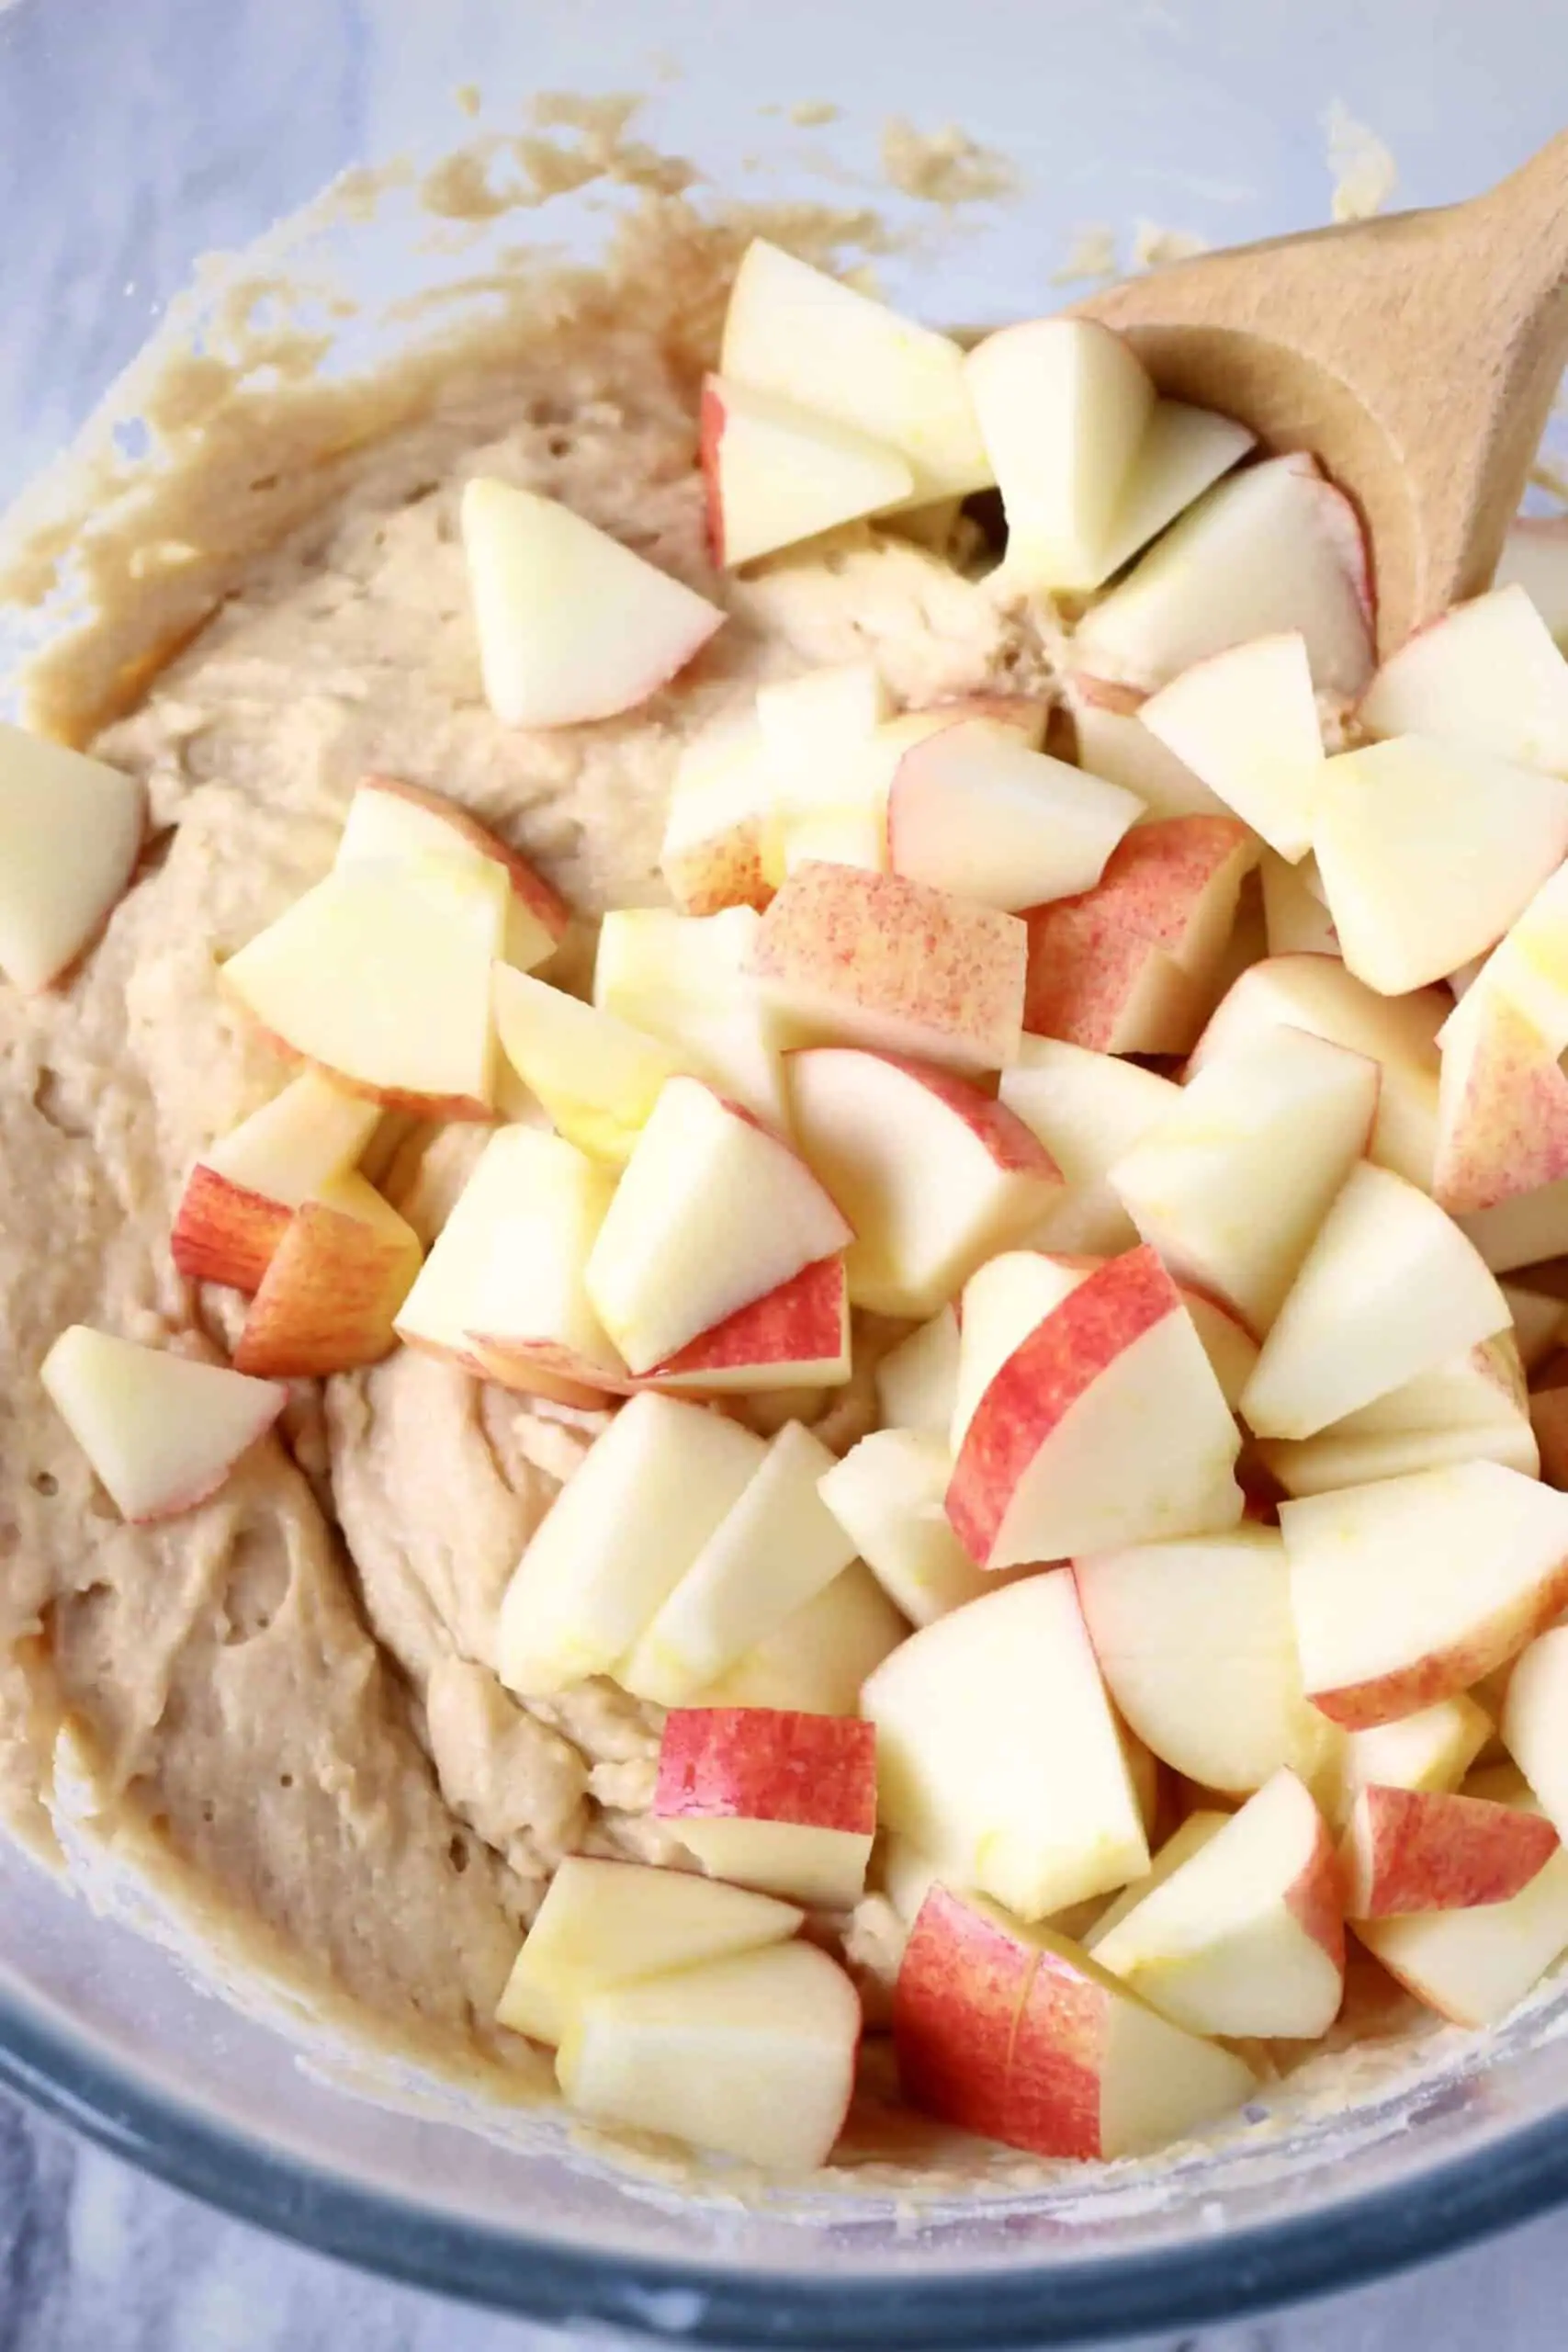 Raw gluten-free vegan muffin batter with pieces of chopped apple in a bowl with a wooden spoon